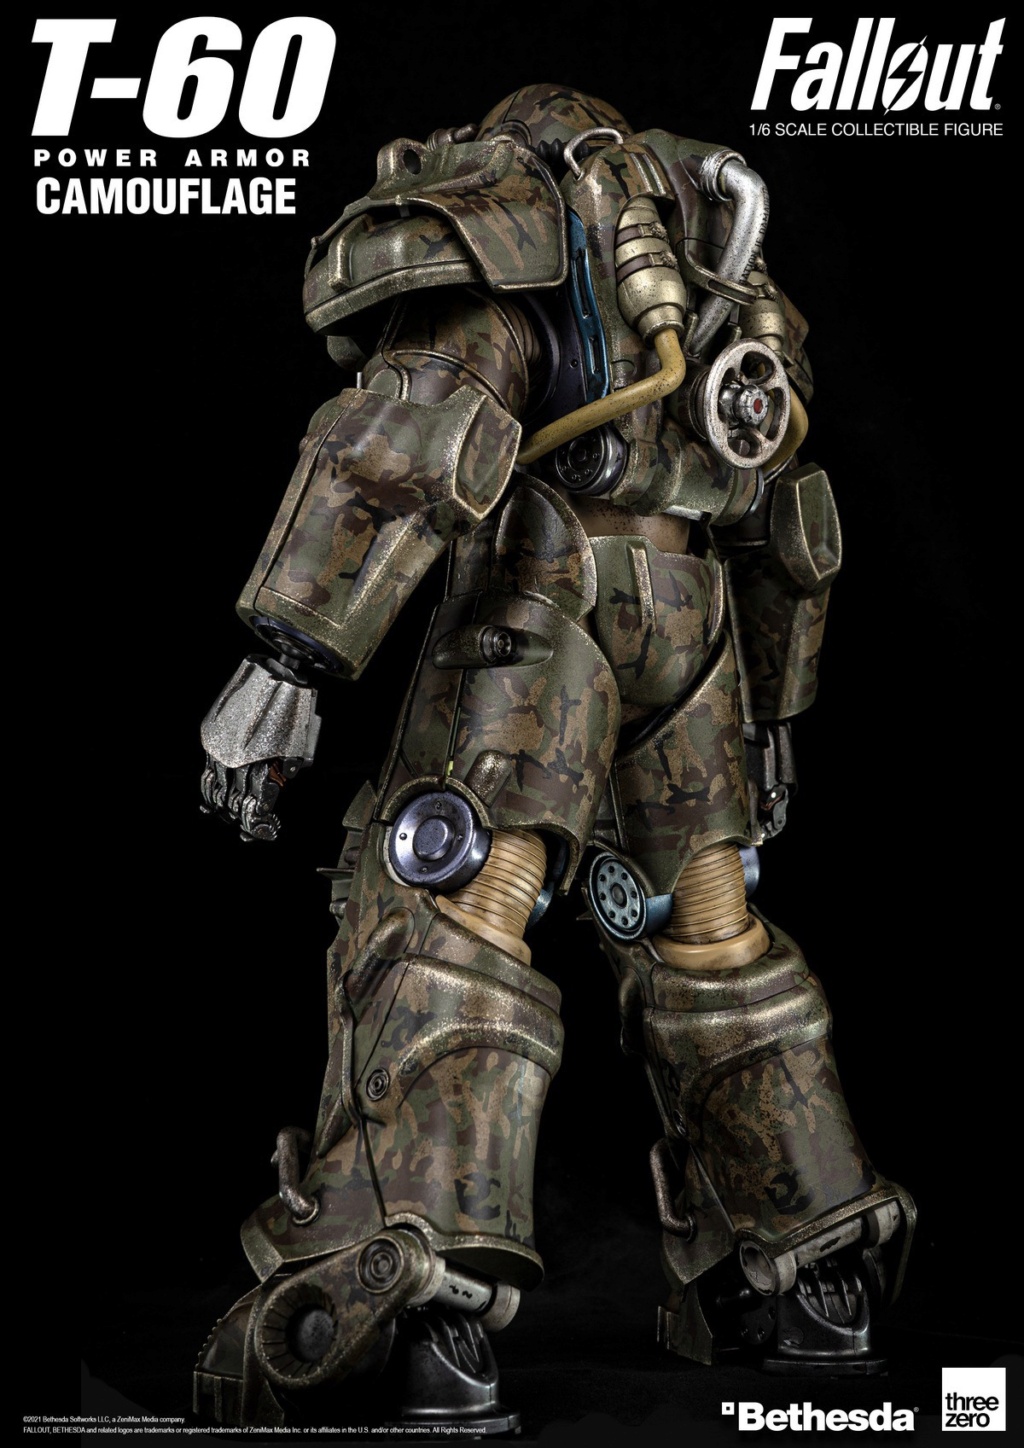 RadiationSeries - NEW PRODUCT: Threezero: 1/6 Fallout: Remaining Dust/Radiation Series-T-60 Power Armor Action Figure 0fb81f10